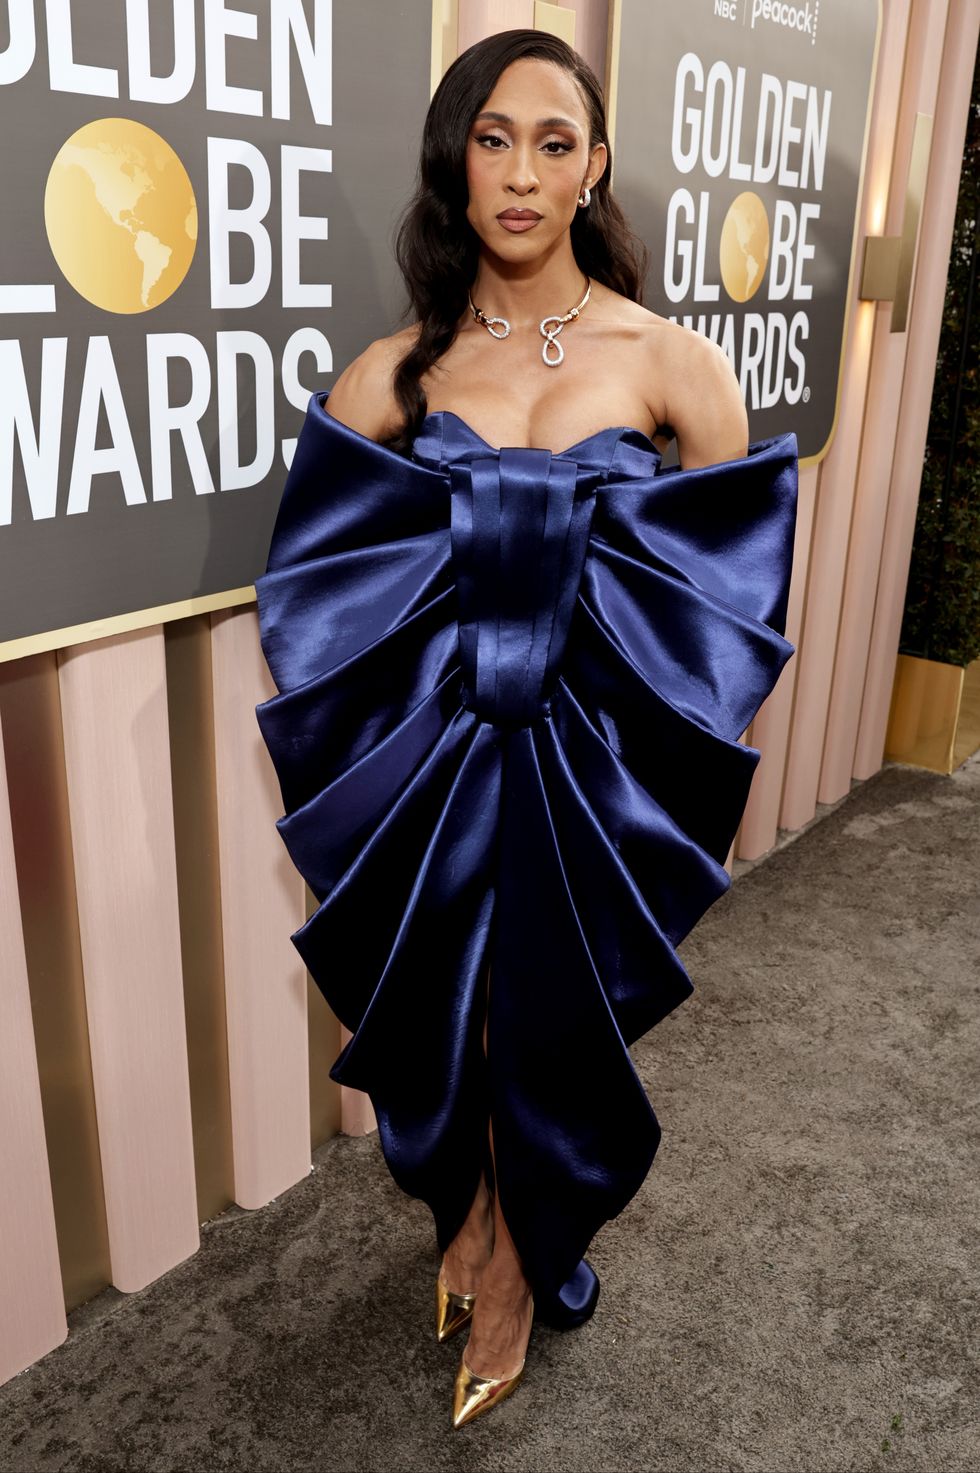 beverly hills, california january 10 80th annual golden globe awards pictured michaela jaé rodriguez arrives at the 80th annual golden globe awards held at the beverly hilton hotel on january 10, 2023 in beverly hills, california photo by todd williamsonnbcnbc via getty images